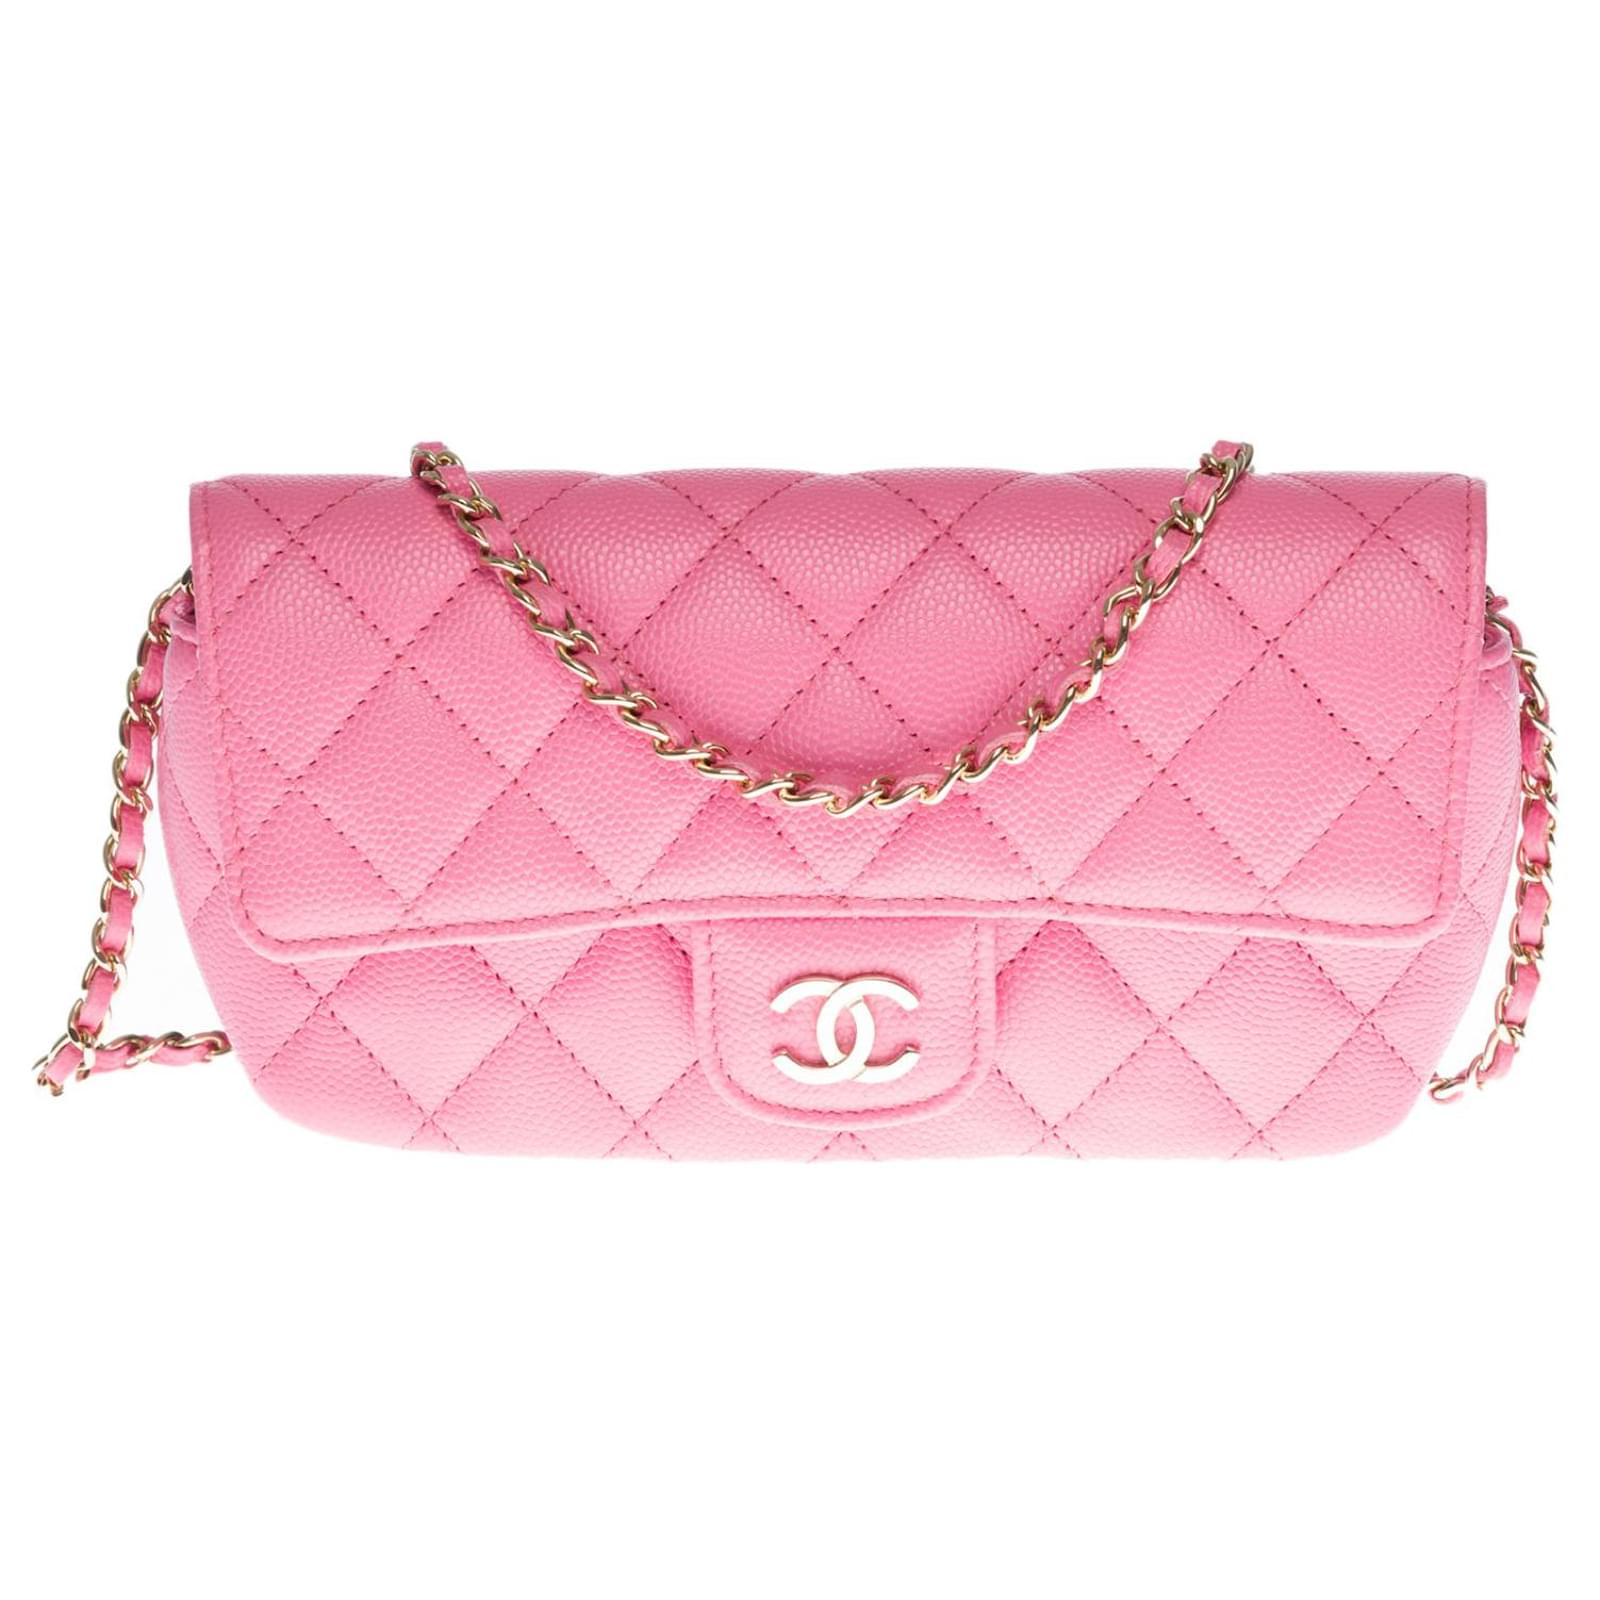 chanel glasses pouch